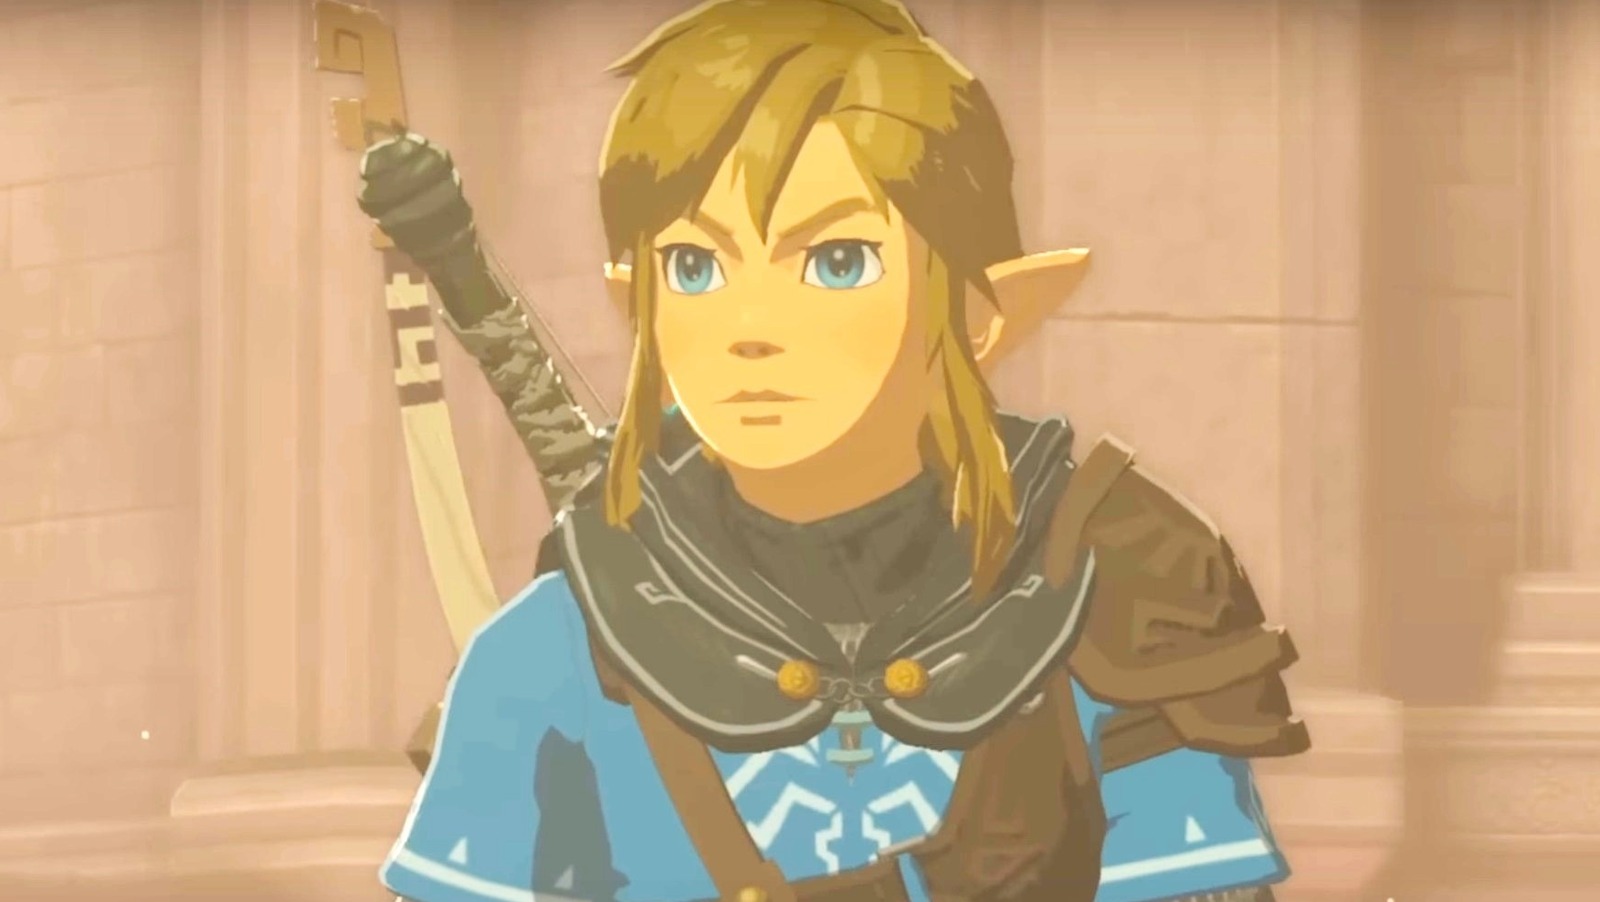 Zelda Live-Action Movie Announced by Nintendo, Director Wes Ball